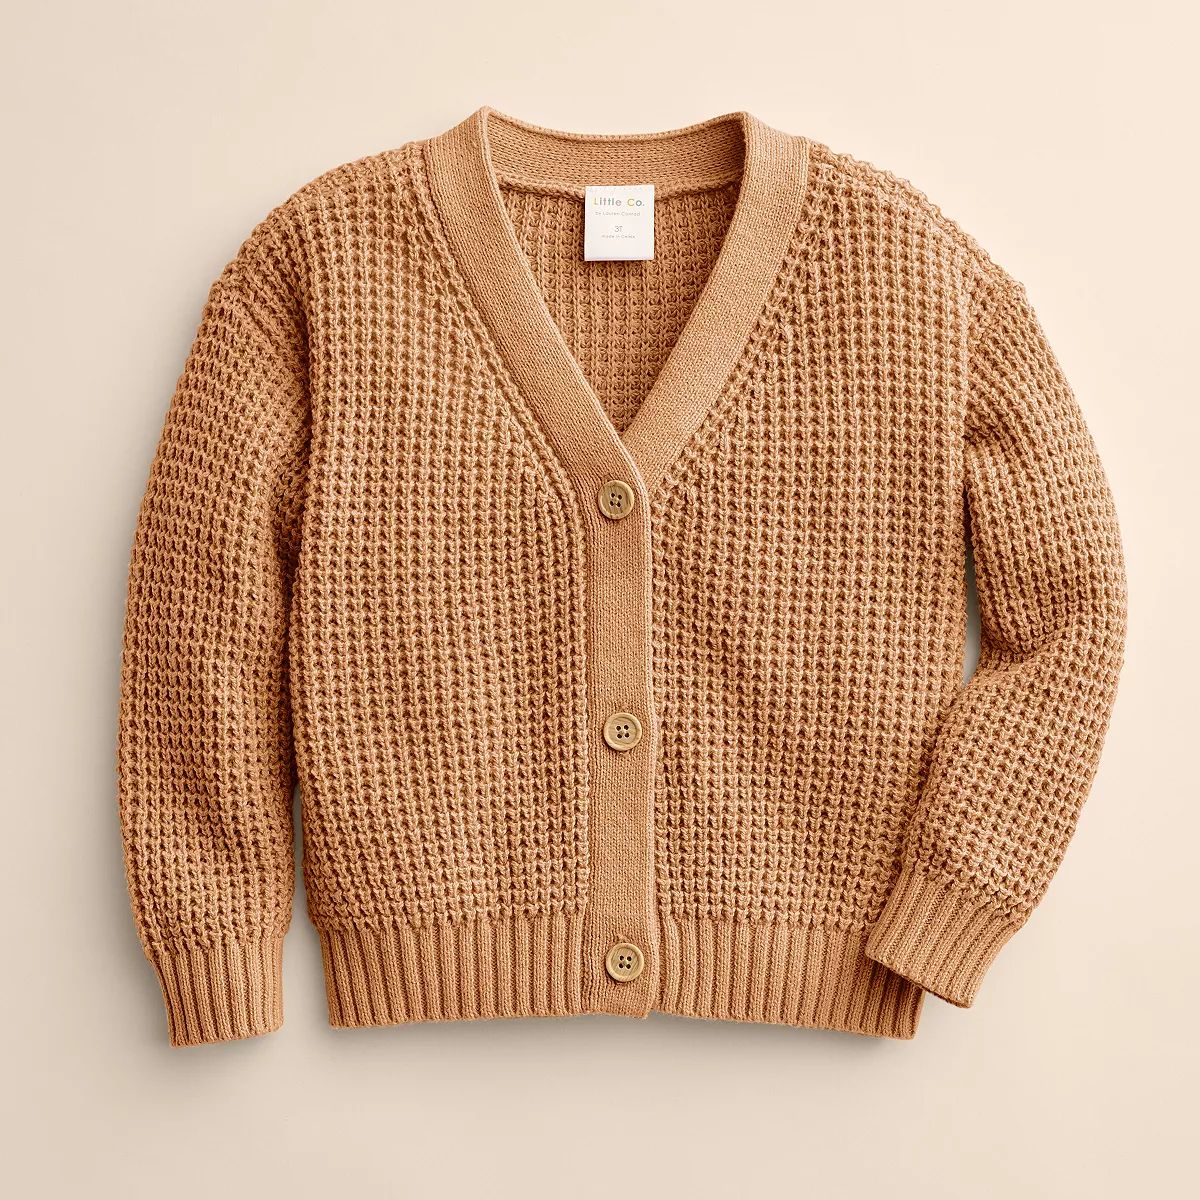 Kids 4-12 Little Co. by Lauren Conrad Relaxed Waffle Cardigan | Kohl's